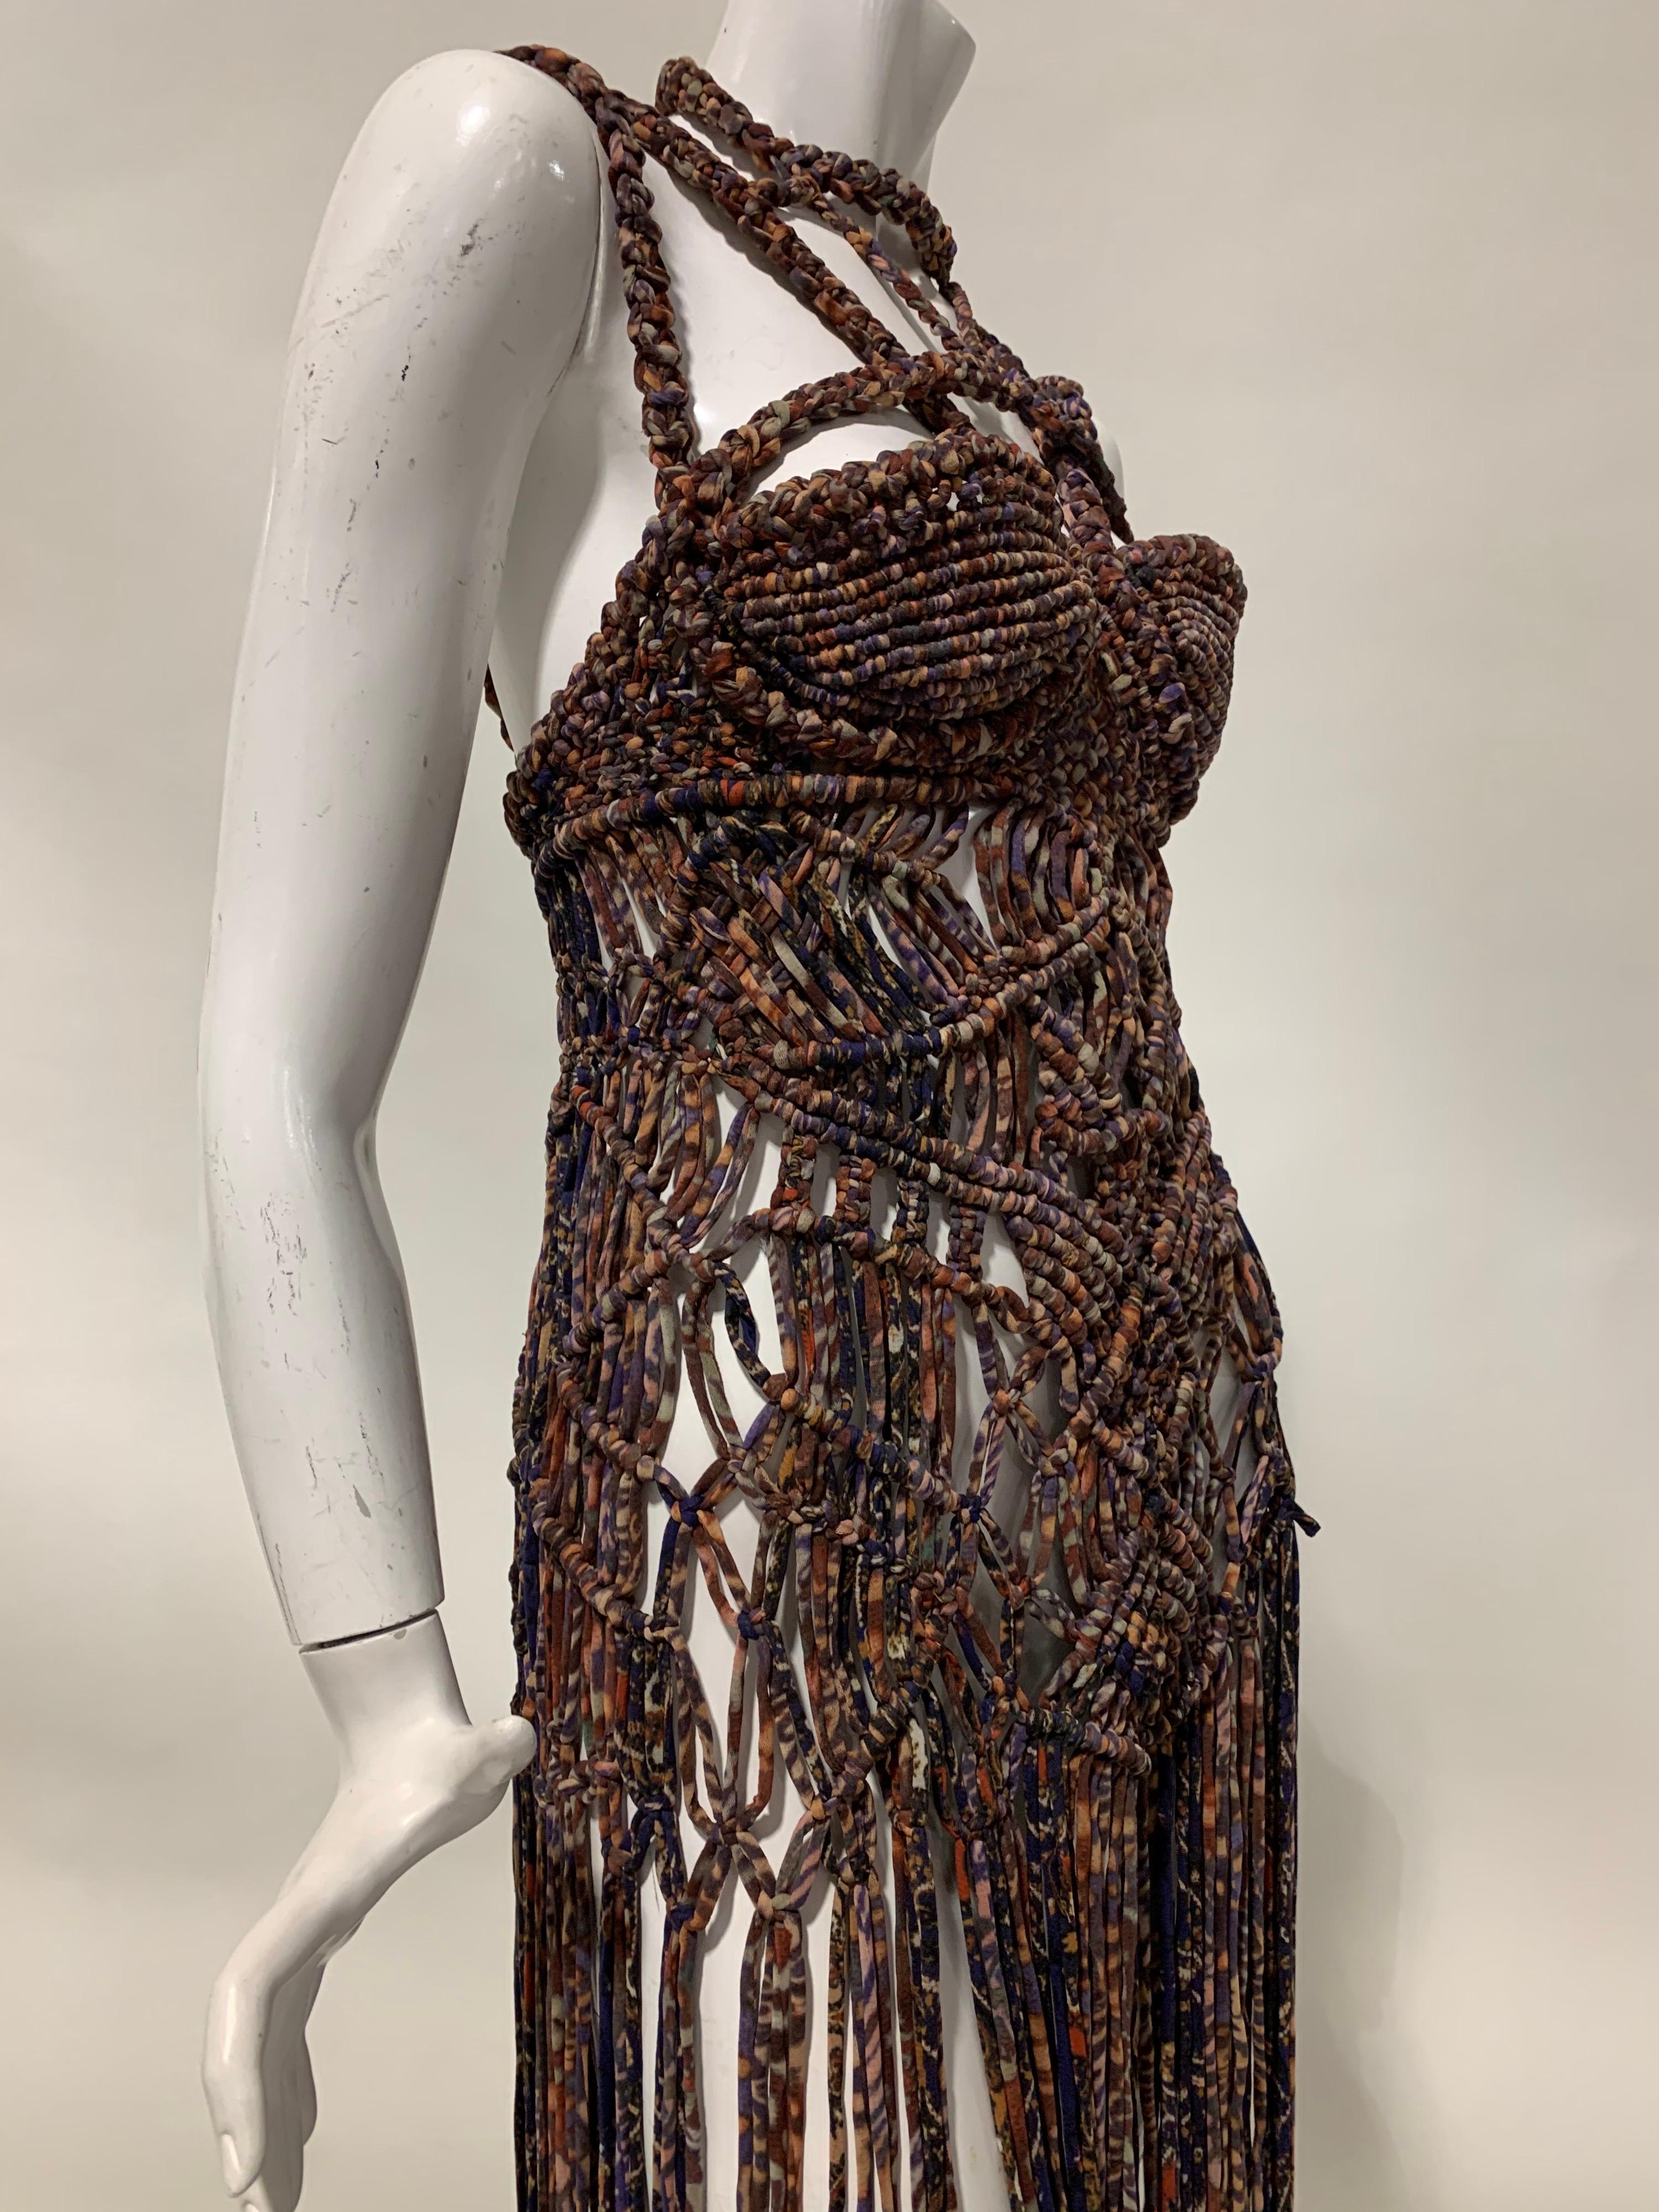 Torso Creations “Ibiza” Macrame Gown W/ Sculpted Bodice & Fringe  In New Condition For Sale In Gresham, OR